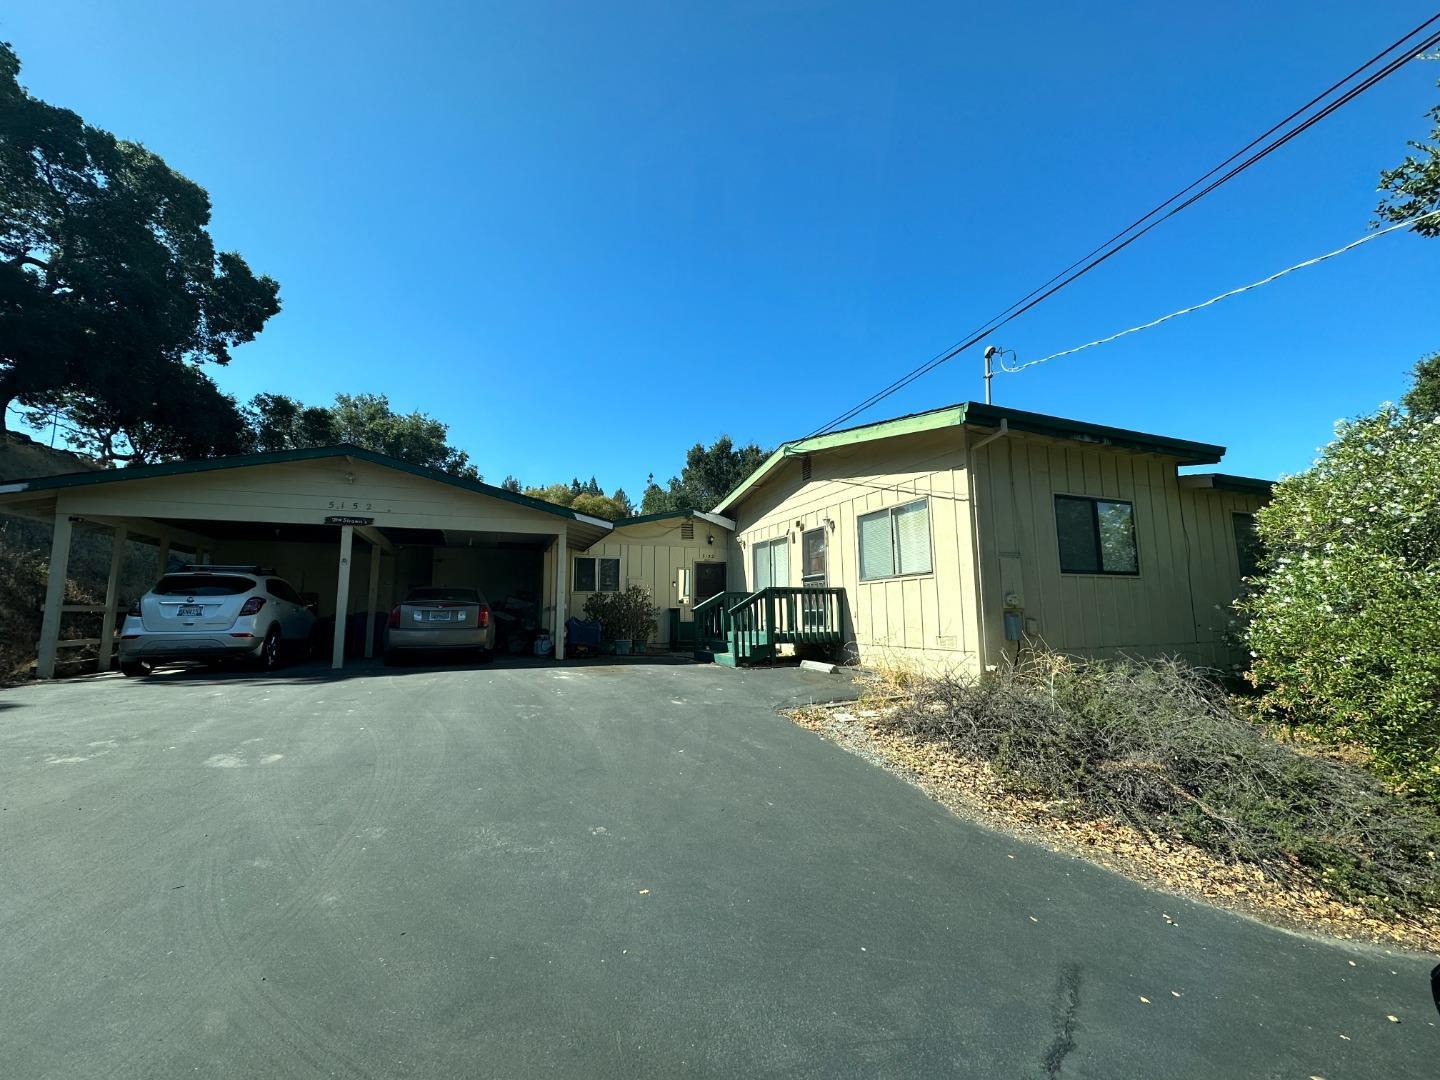 Photo of 5152 Felter Rd in San Jose, CA